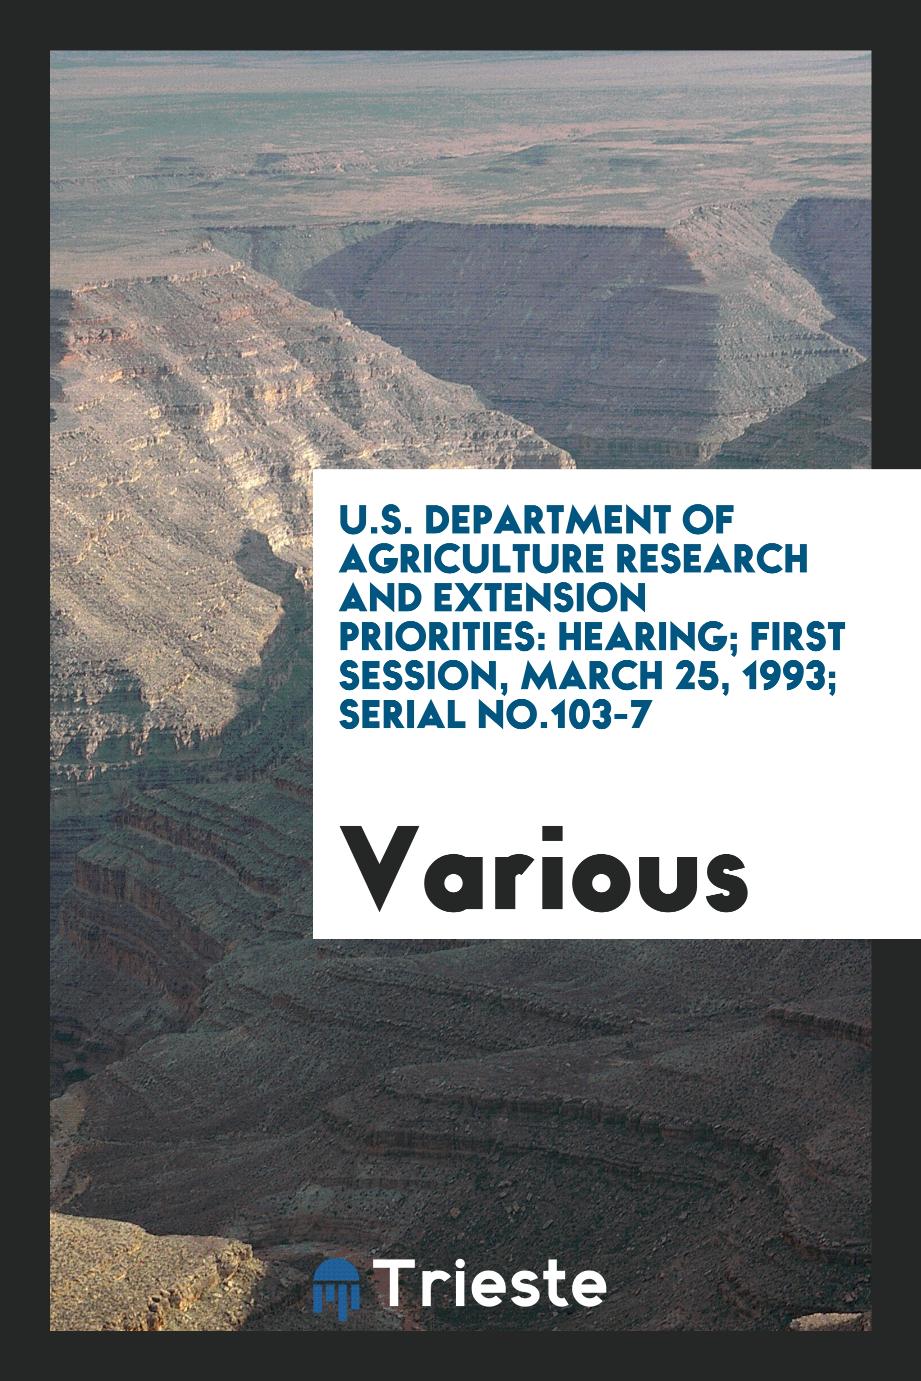 U.S. Department of Agriculture research and extension priorities: hearing; first session, March 25, 1993; Serial No.103-7